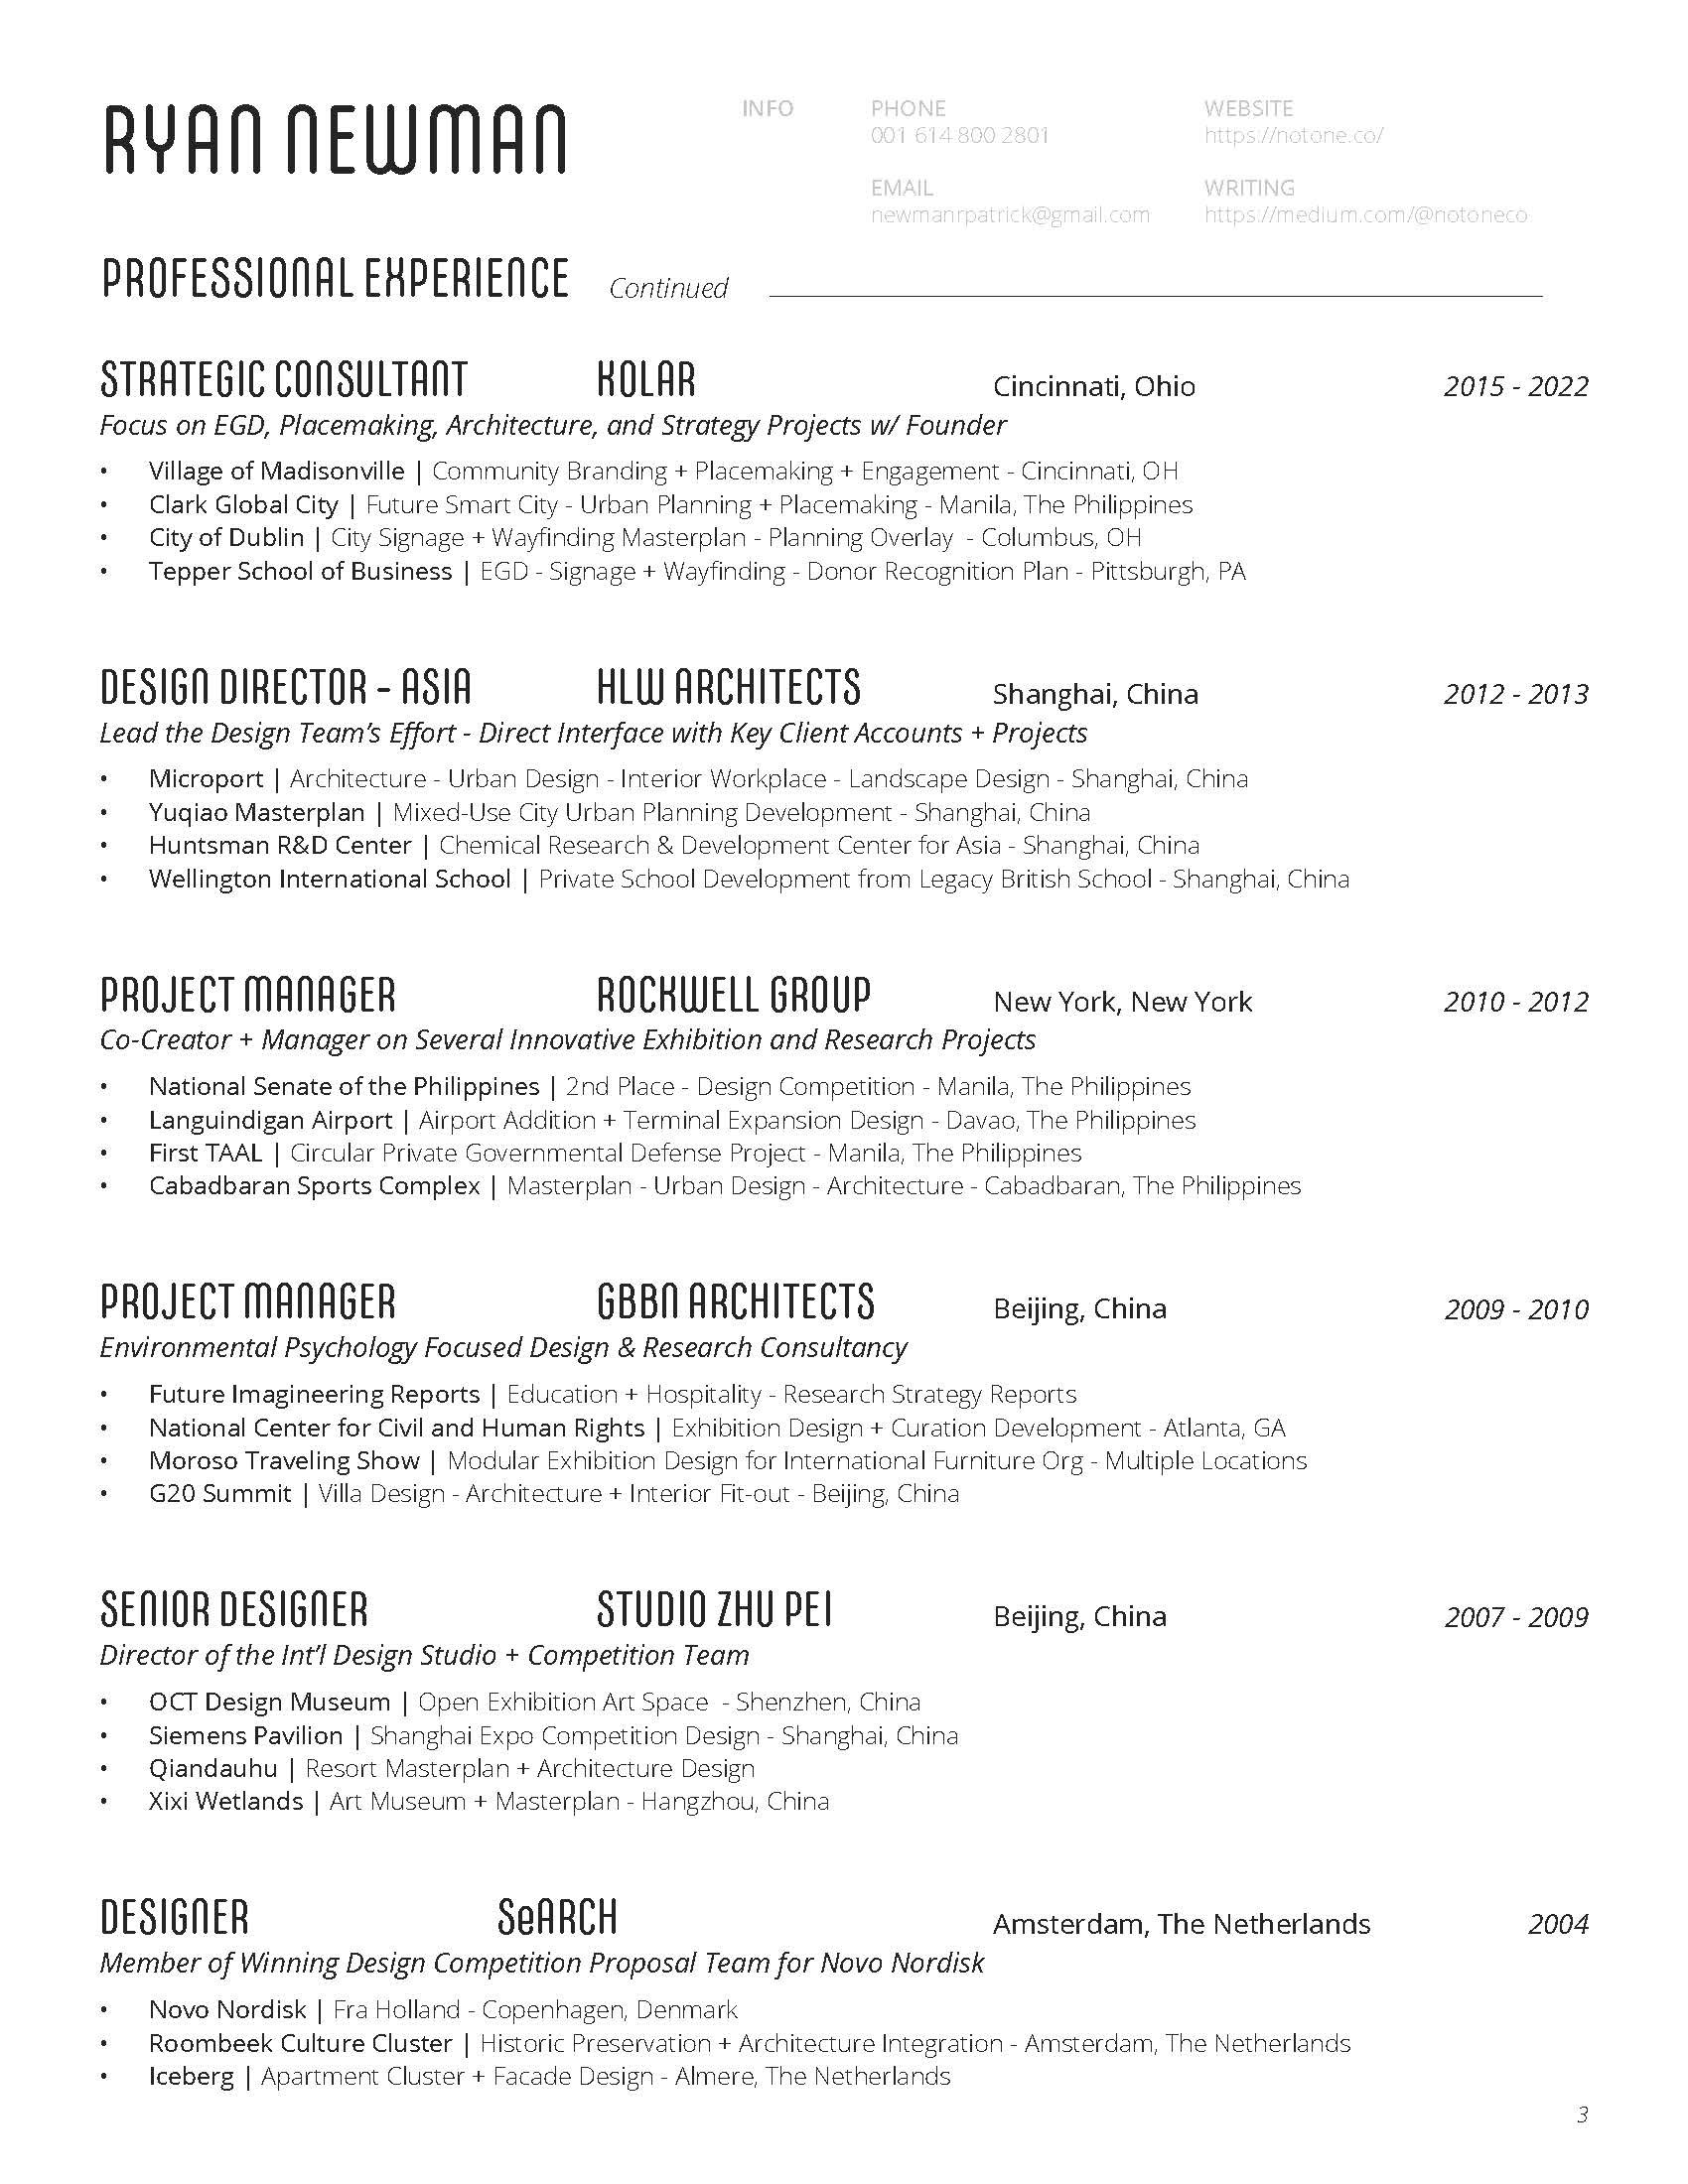 2023_RESUME_long form_Page_3.jpg